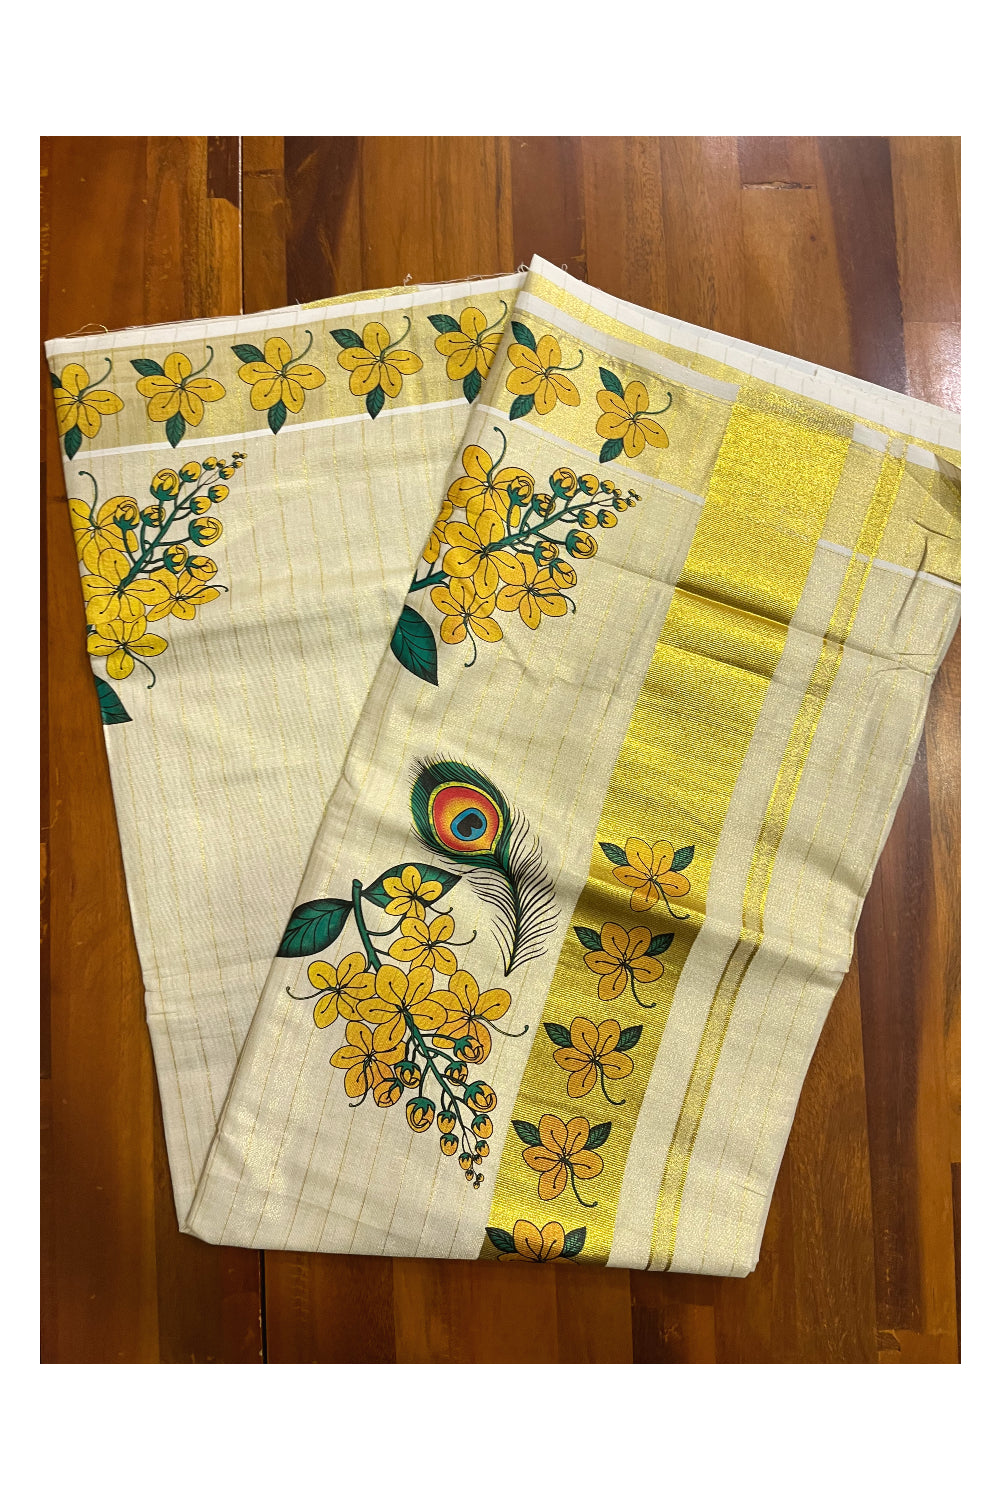 Kerala Tissue Kasavu Lines Design Saree with Feather And Floral Mural Prints on Body